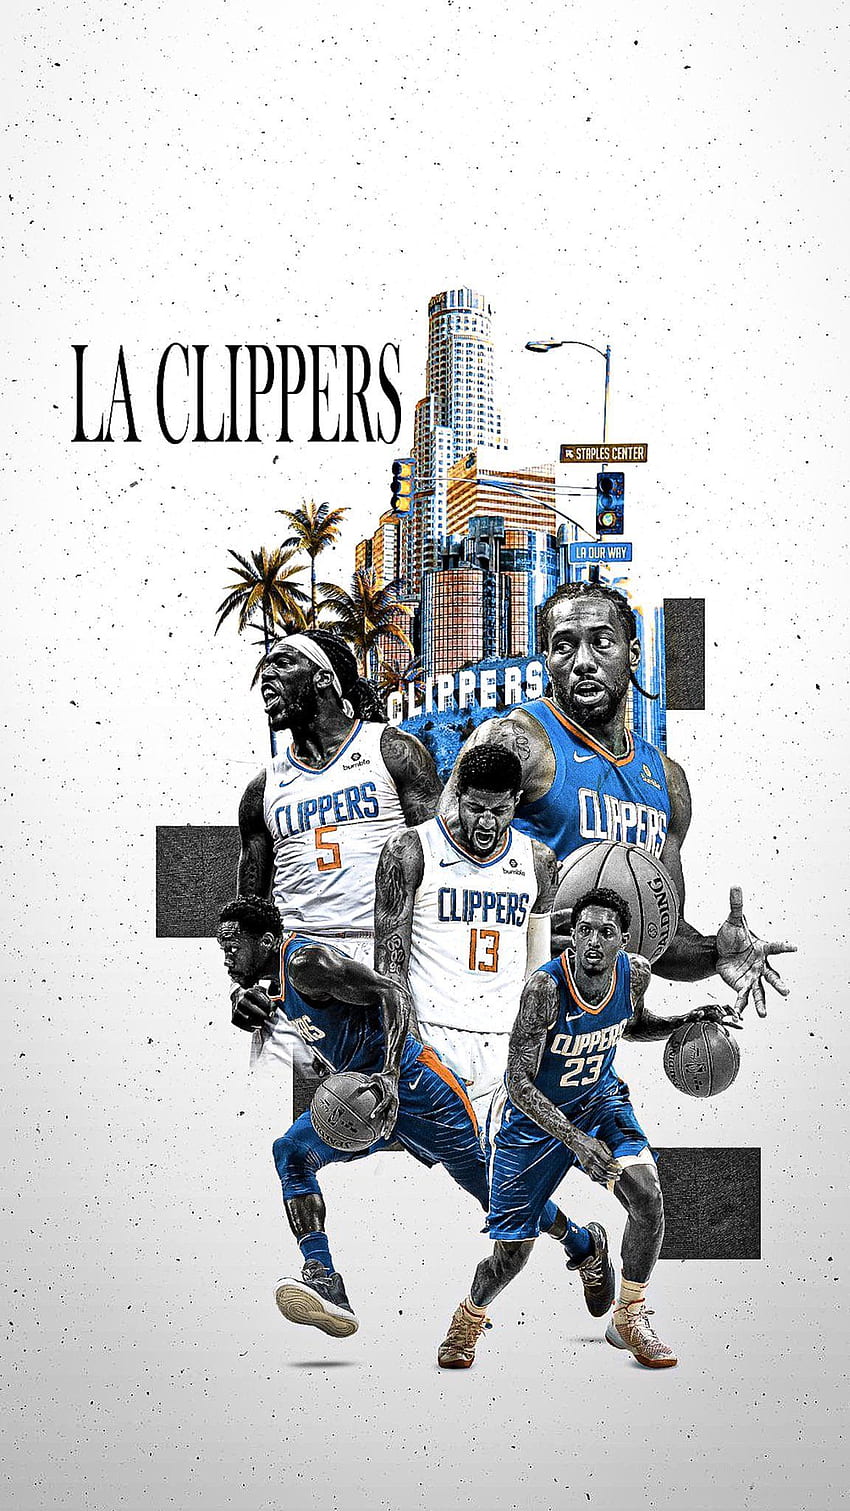 Super awesome Clippers phone for anyone looking for one! : LAClippers, Kawhi Leonard Clippers HD phone wallpaper